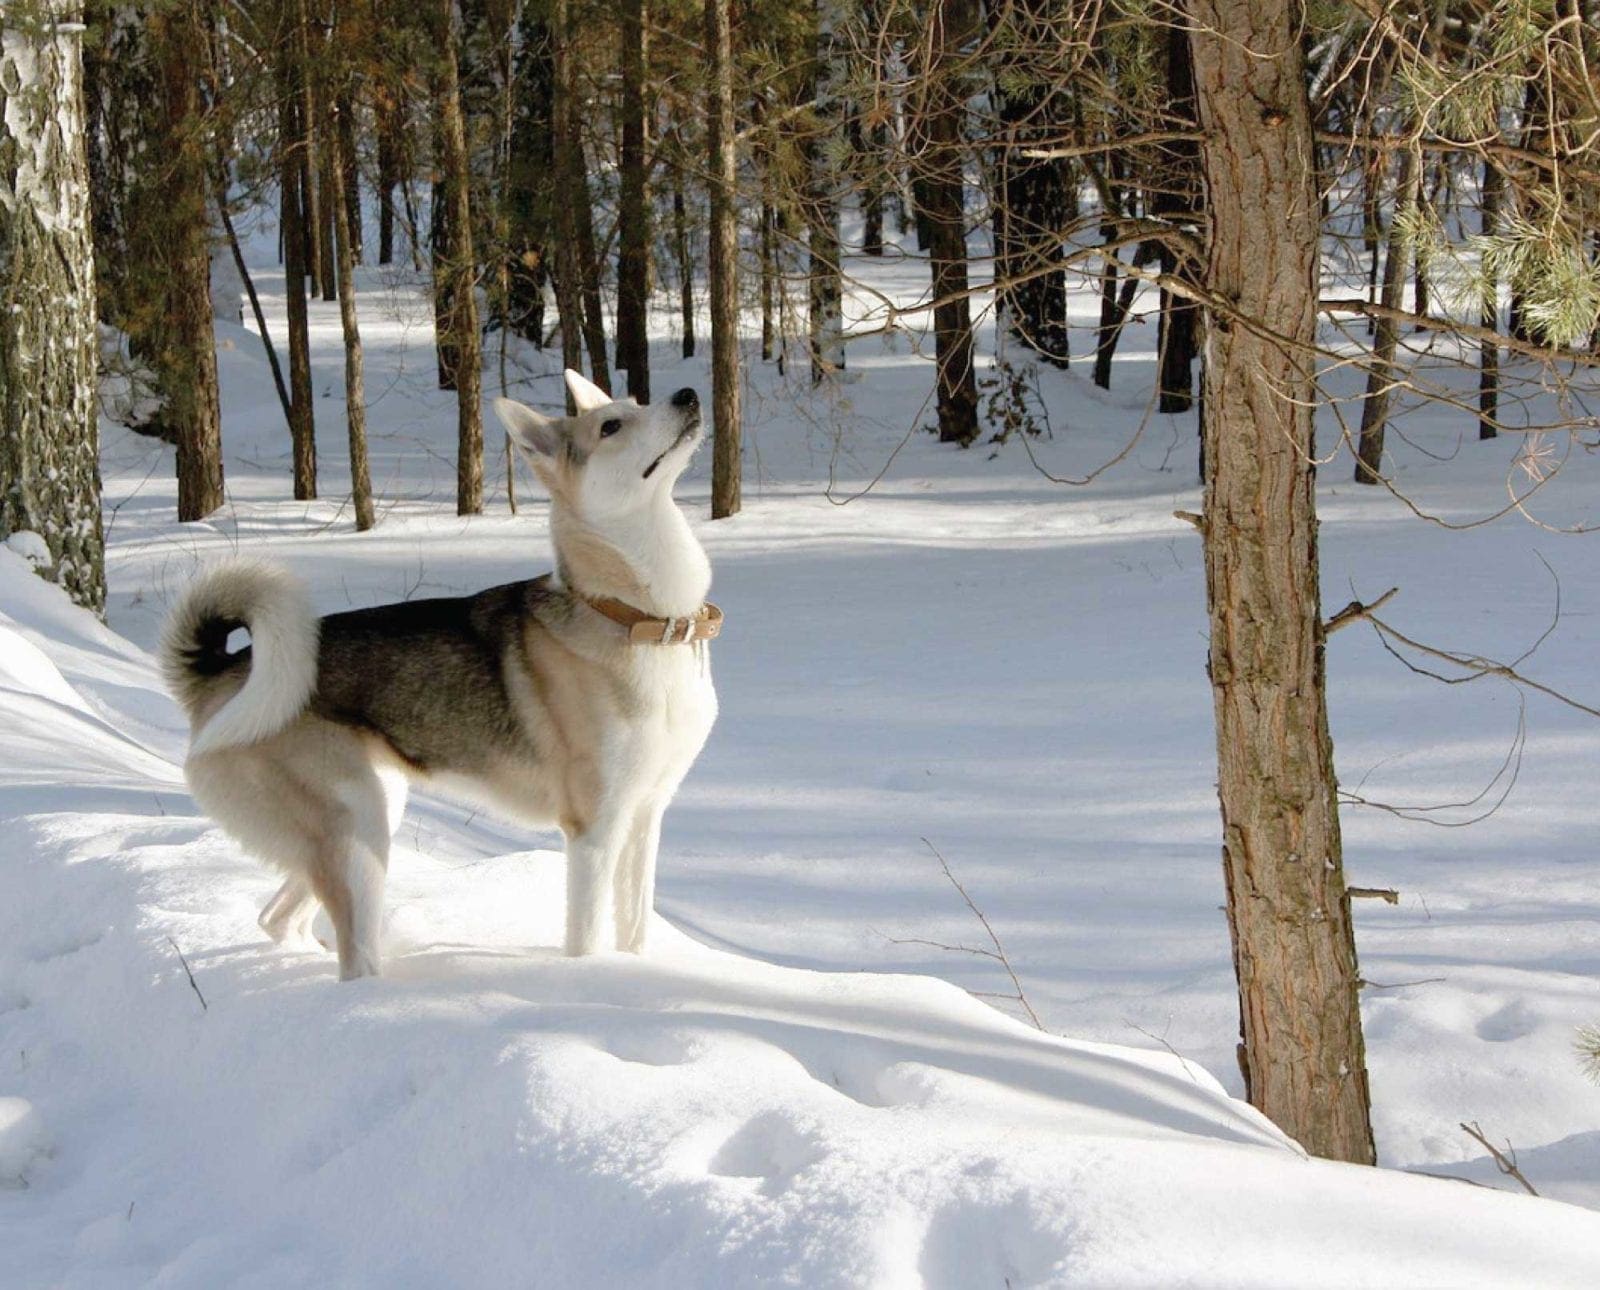 A Russian Laika stands in the snow and looks up at a tree